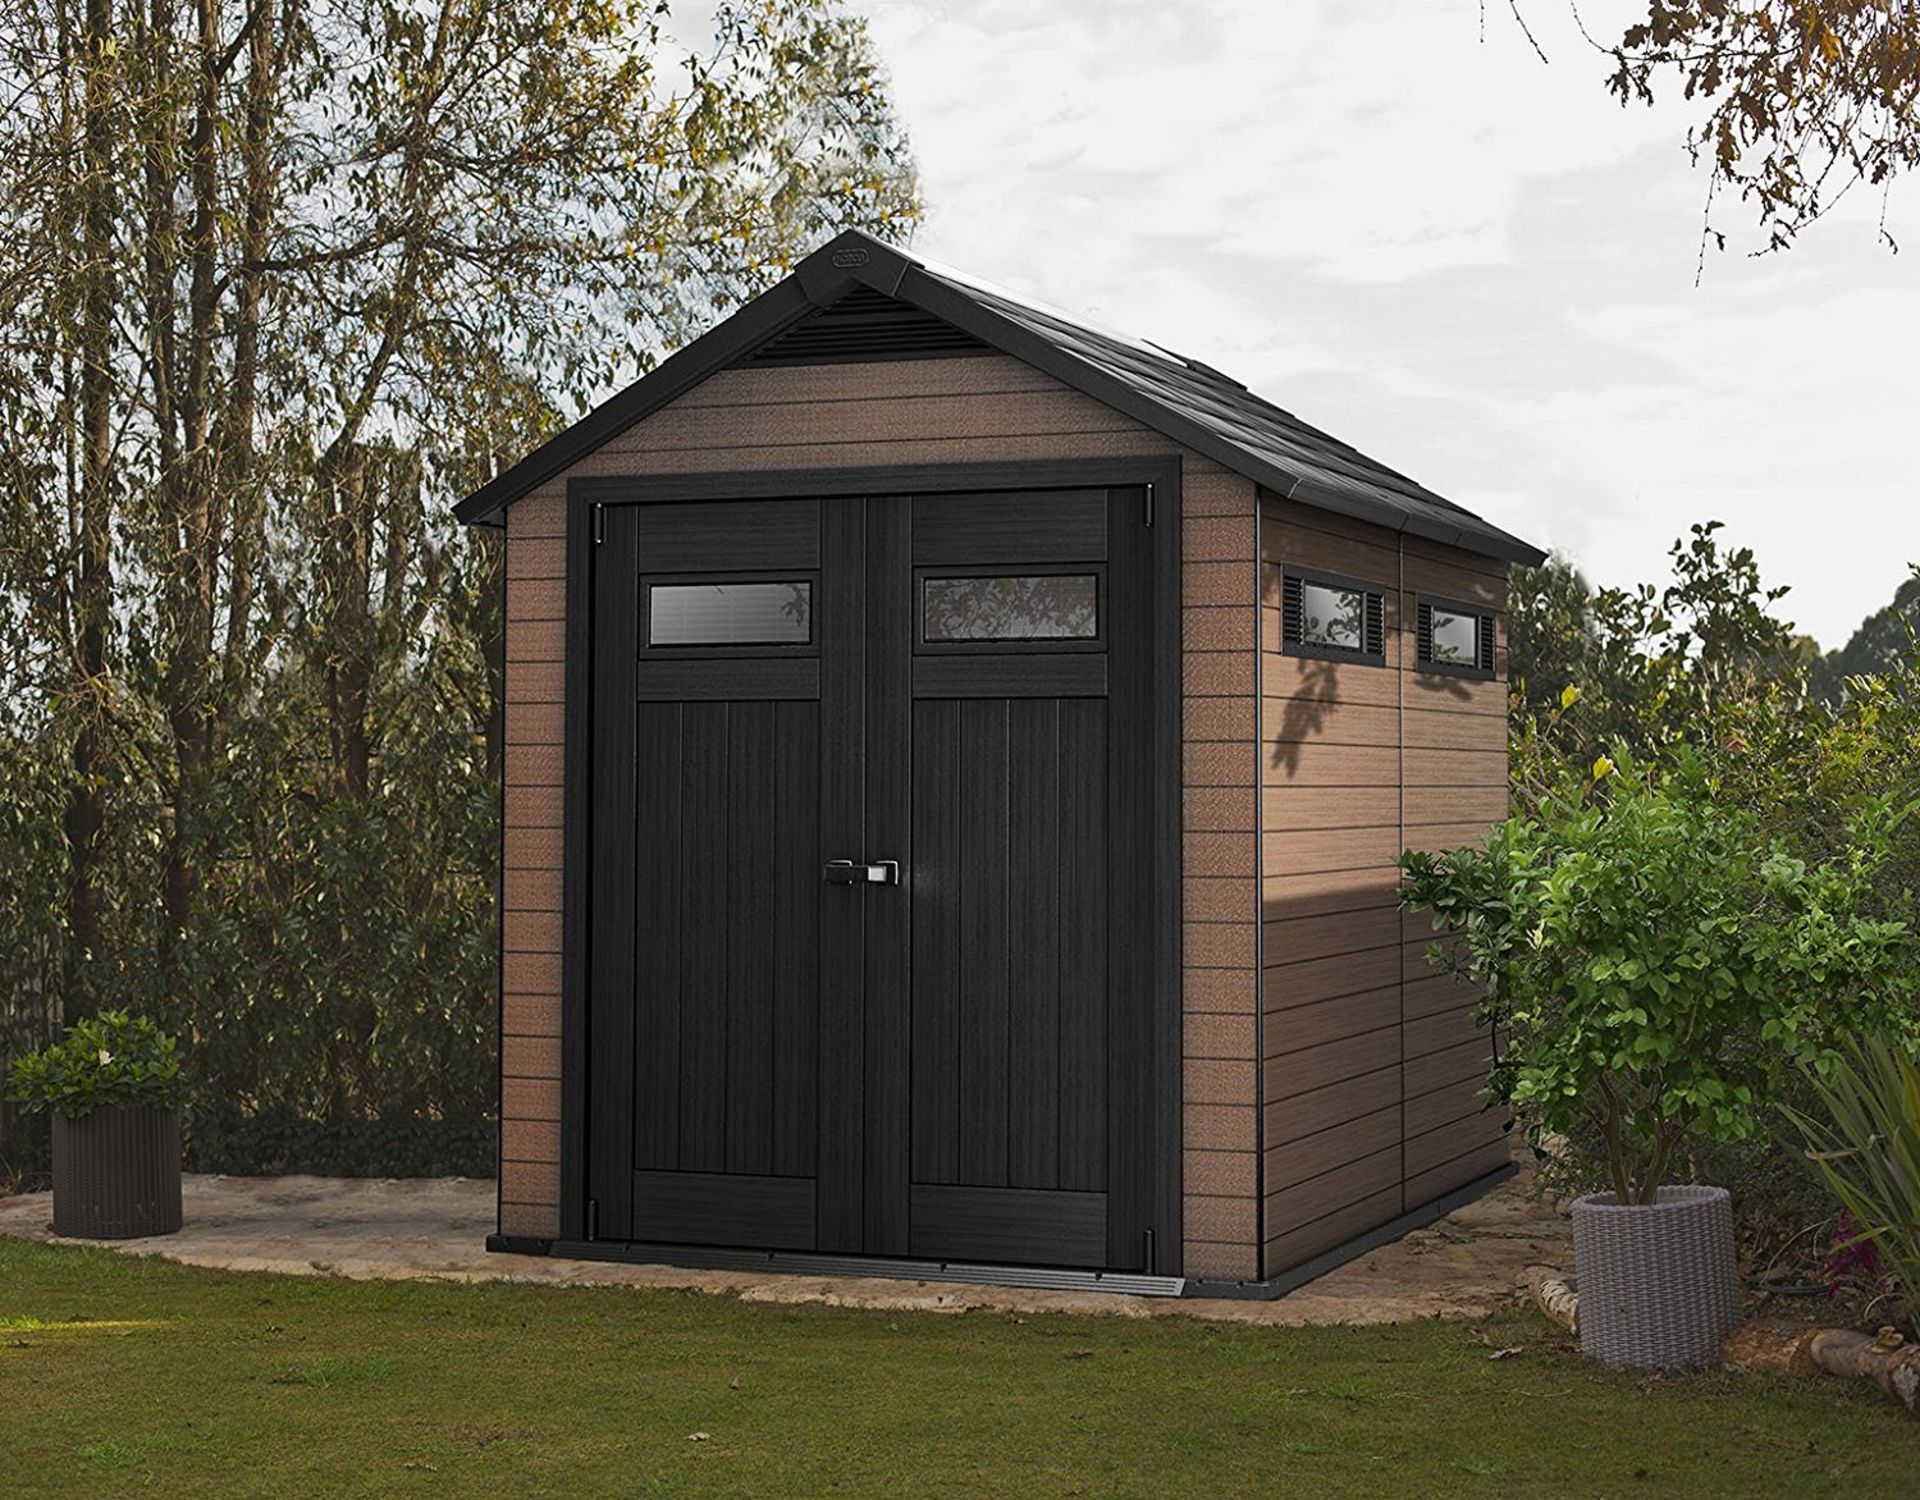 Keter Fusion 759 Garden Shed